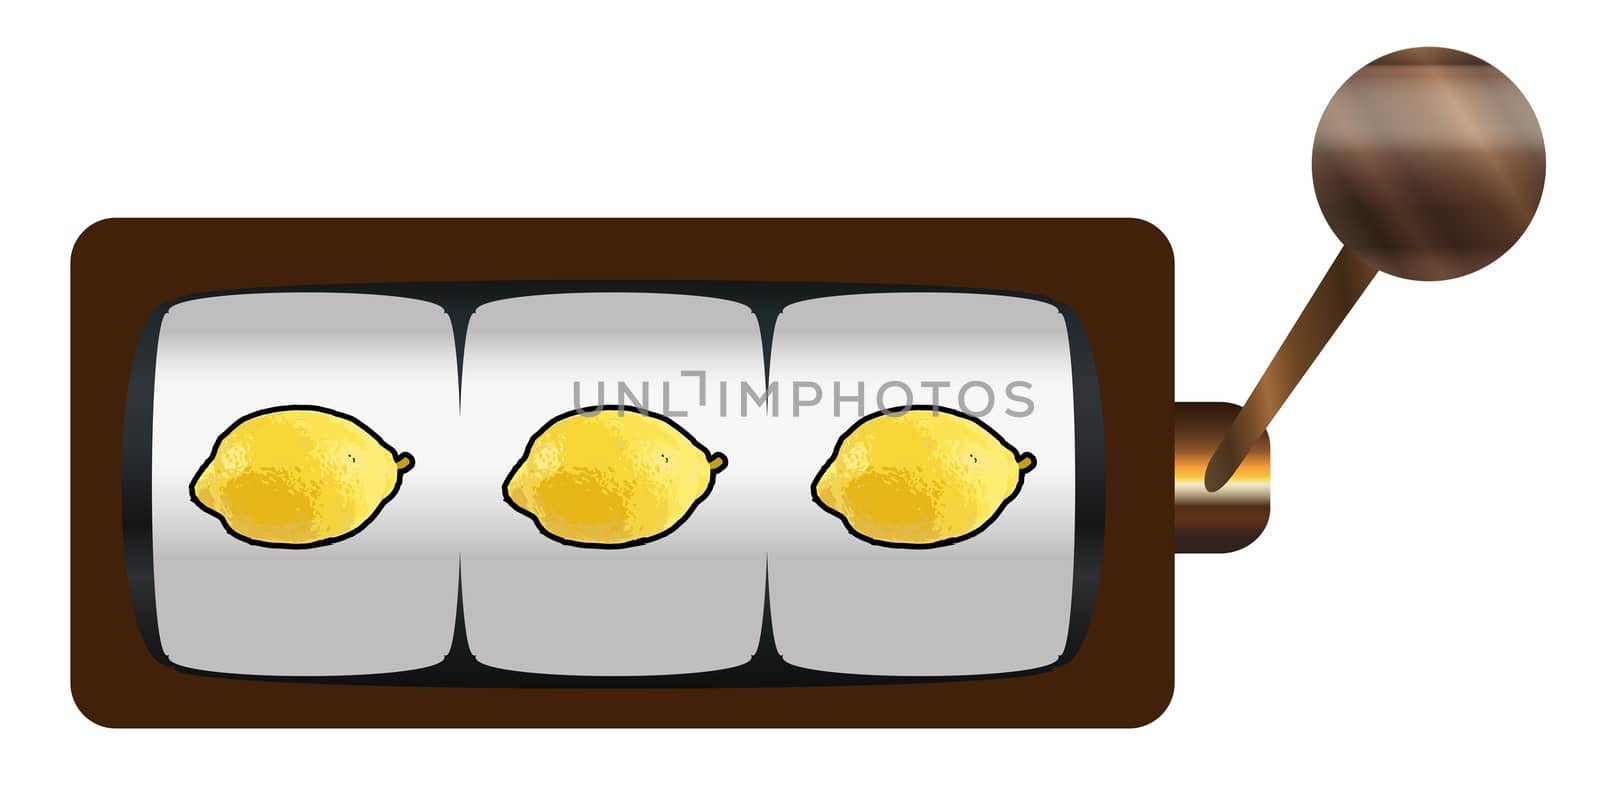 A typical cartoon style three lemons on a spin loser of a one armed bandit or fruit machine over a white background